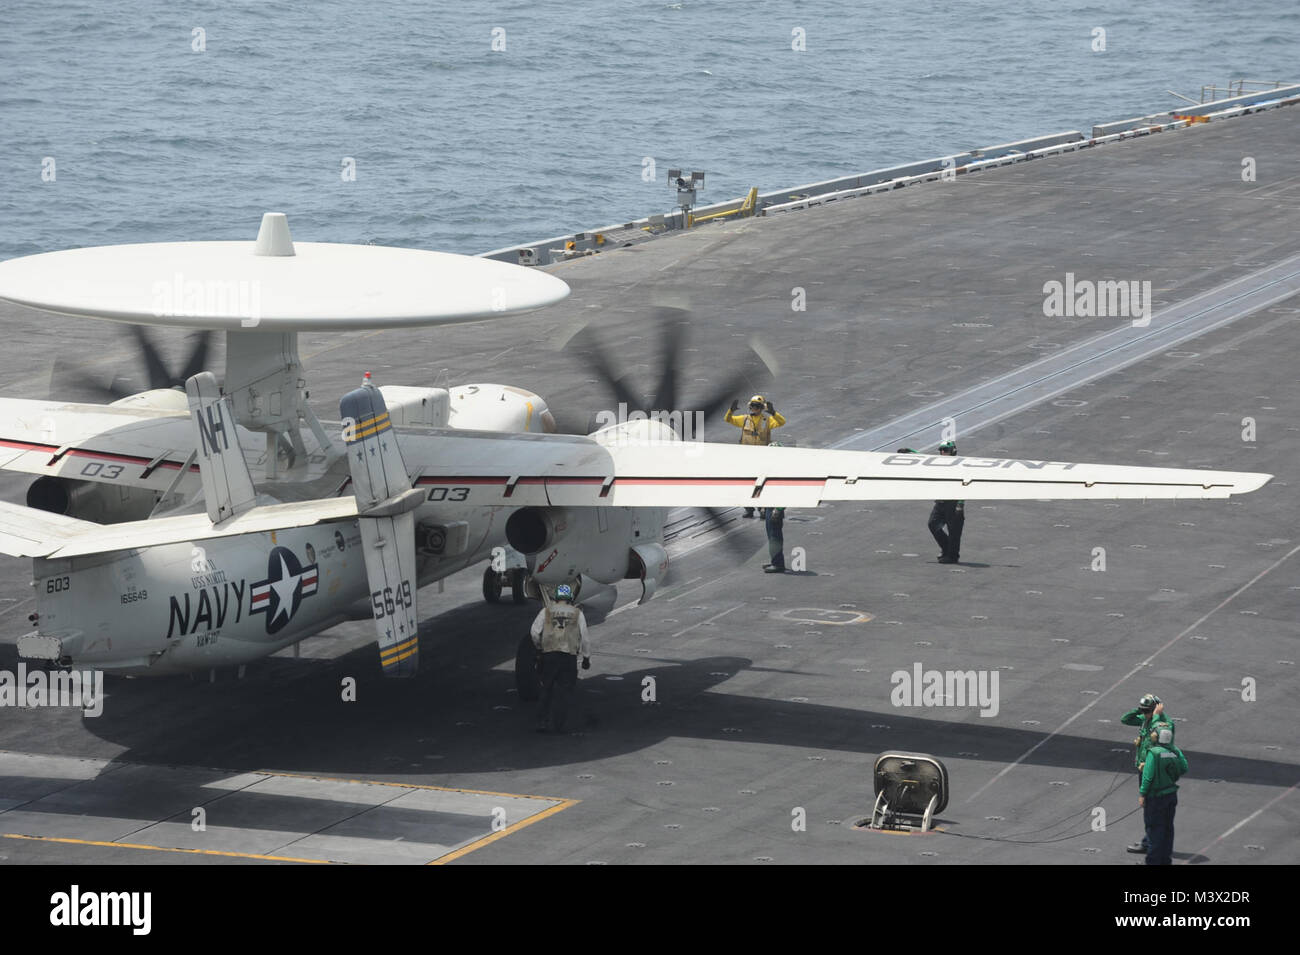 GULF OF OMAN (July 12, 2013) -- An E-2C Hawkeye assigned to the 'Wallbangers' of Carrier Airborne Early Warning Squadron (VAW) 117 gets ready to launch from the flight deck of the aircraft carrier USS Nimitz (CVN 68). Nimitz Strike Group is deployed to the U.S. 5th Fleet area of responsibility conducting maritime security operations, theater security cooperation efforts and support missions for Operation Enduring Freedom.  (U.S. Navy photo by Mass Communication Specialist 3rd Class Chris Bartlett/Released) 13 July Batch 1 of 34 by USS NIMITZ (CVN 68) Stock Photo